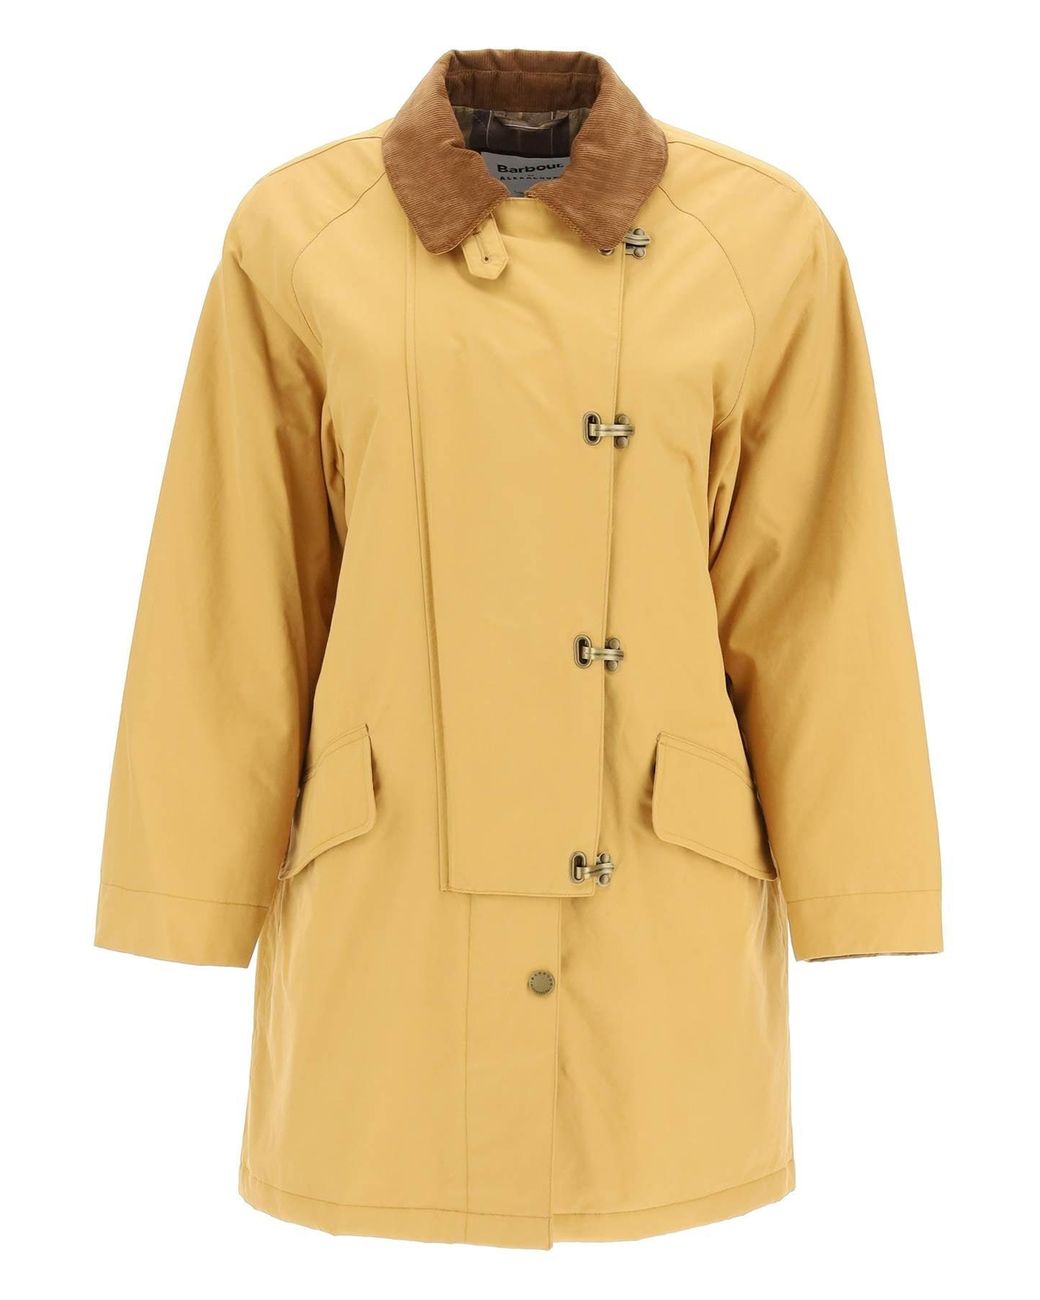 Barbour X Alexa Chung Gala Casual Jacket in Yellow | Lyst Canada